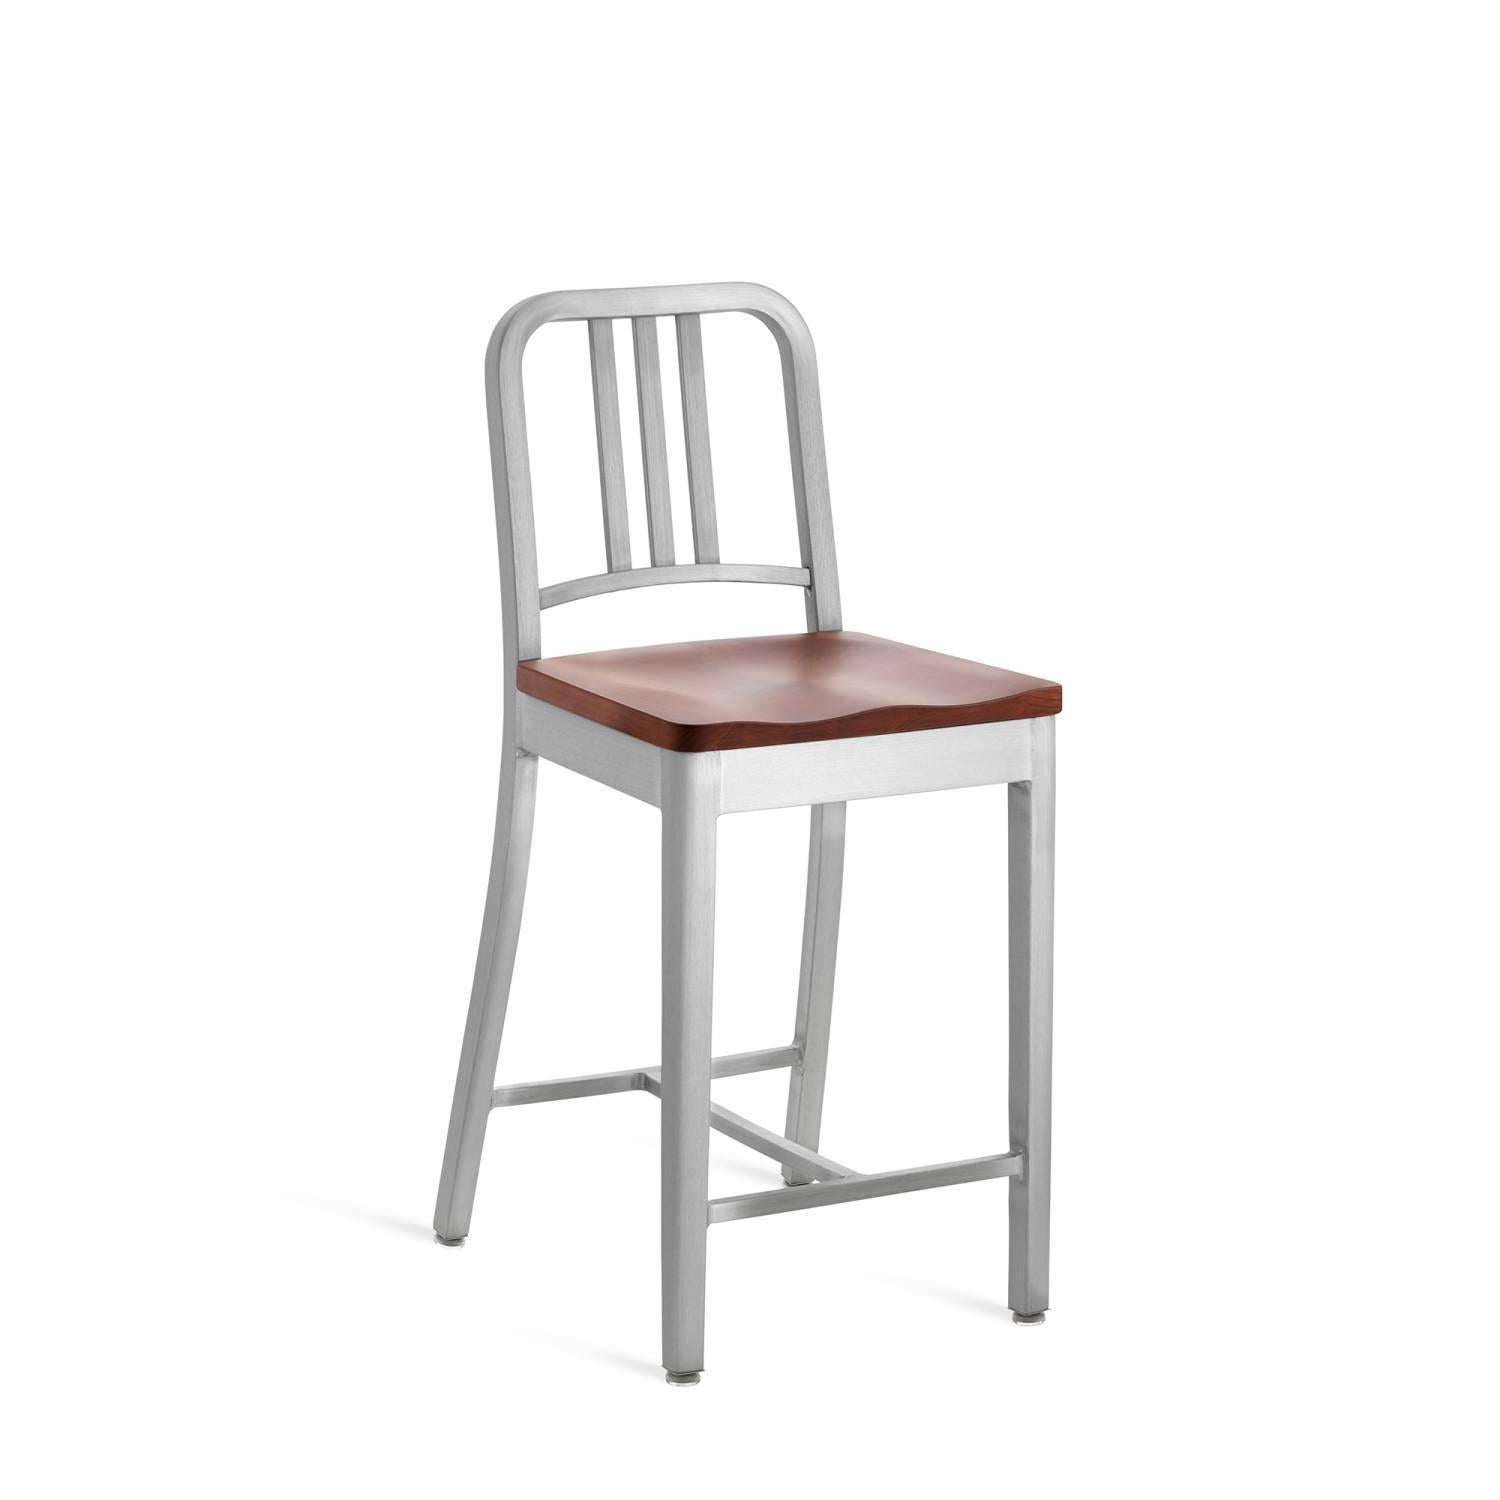 First built for use on submarines in 1944, the Navy Chair has been in continuous production ever since. With the famous 77 step process, our craftsmen take soft, recycled aluminum, hand form and weld it- then temper it for strength. Finally, the